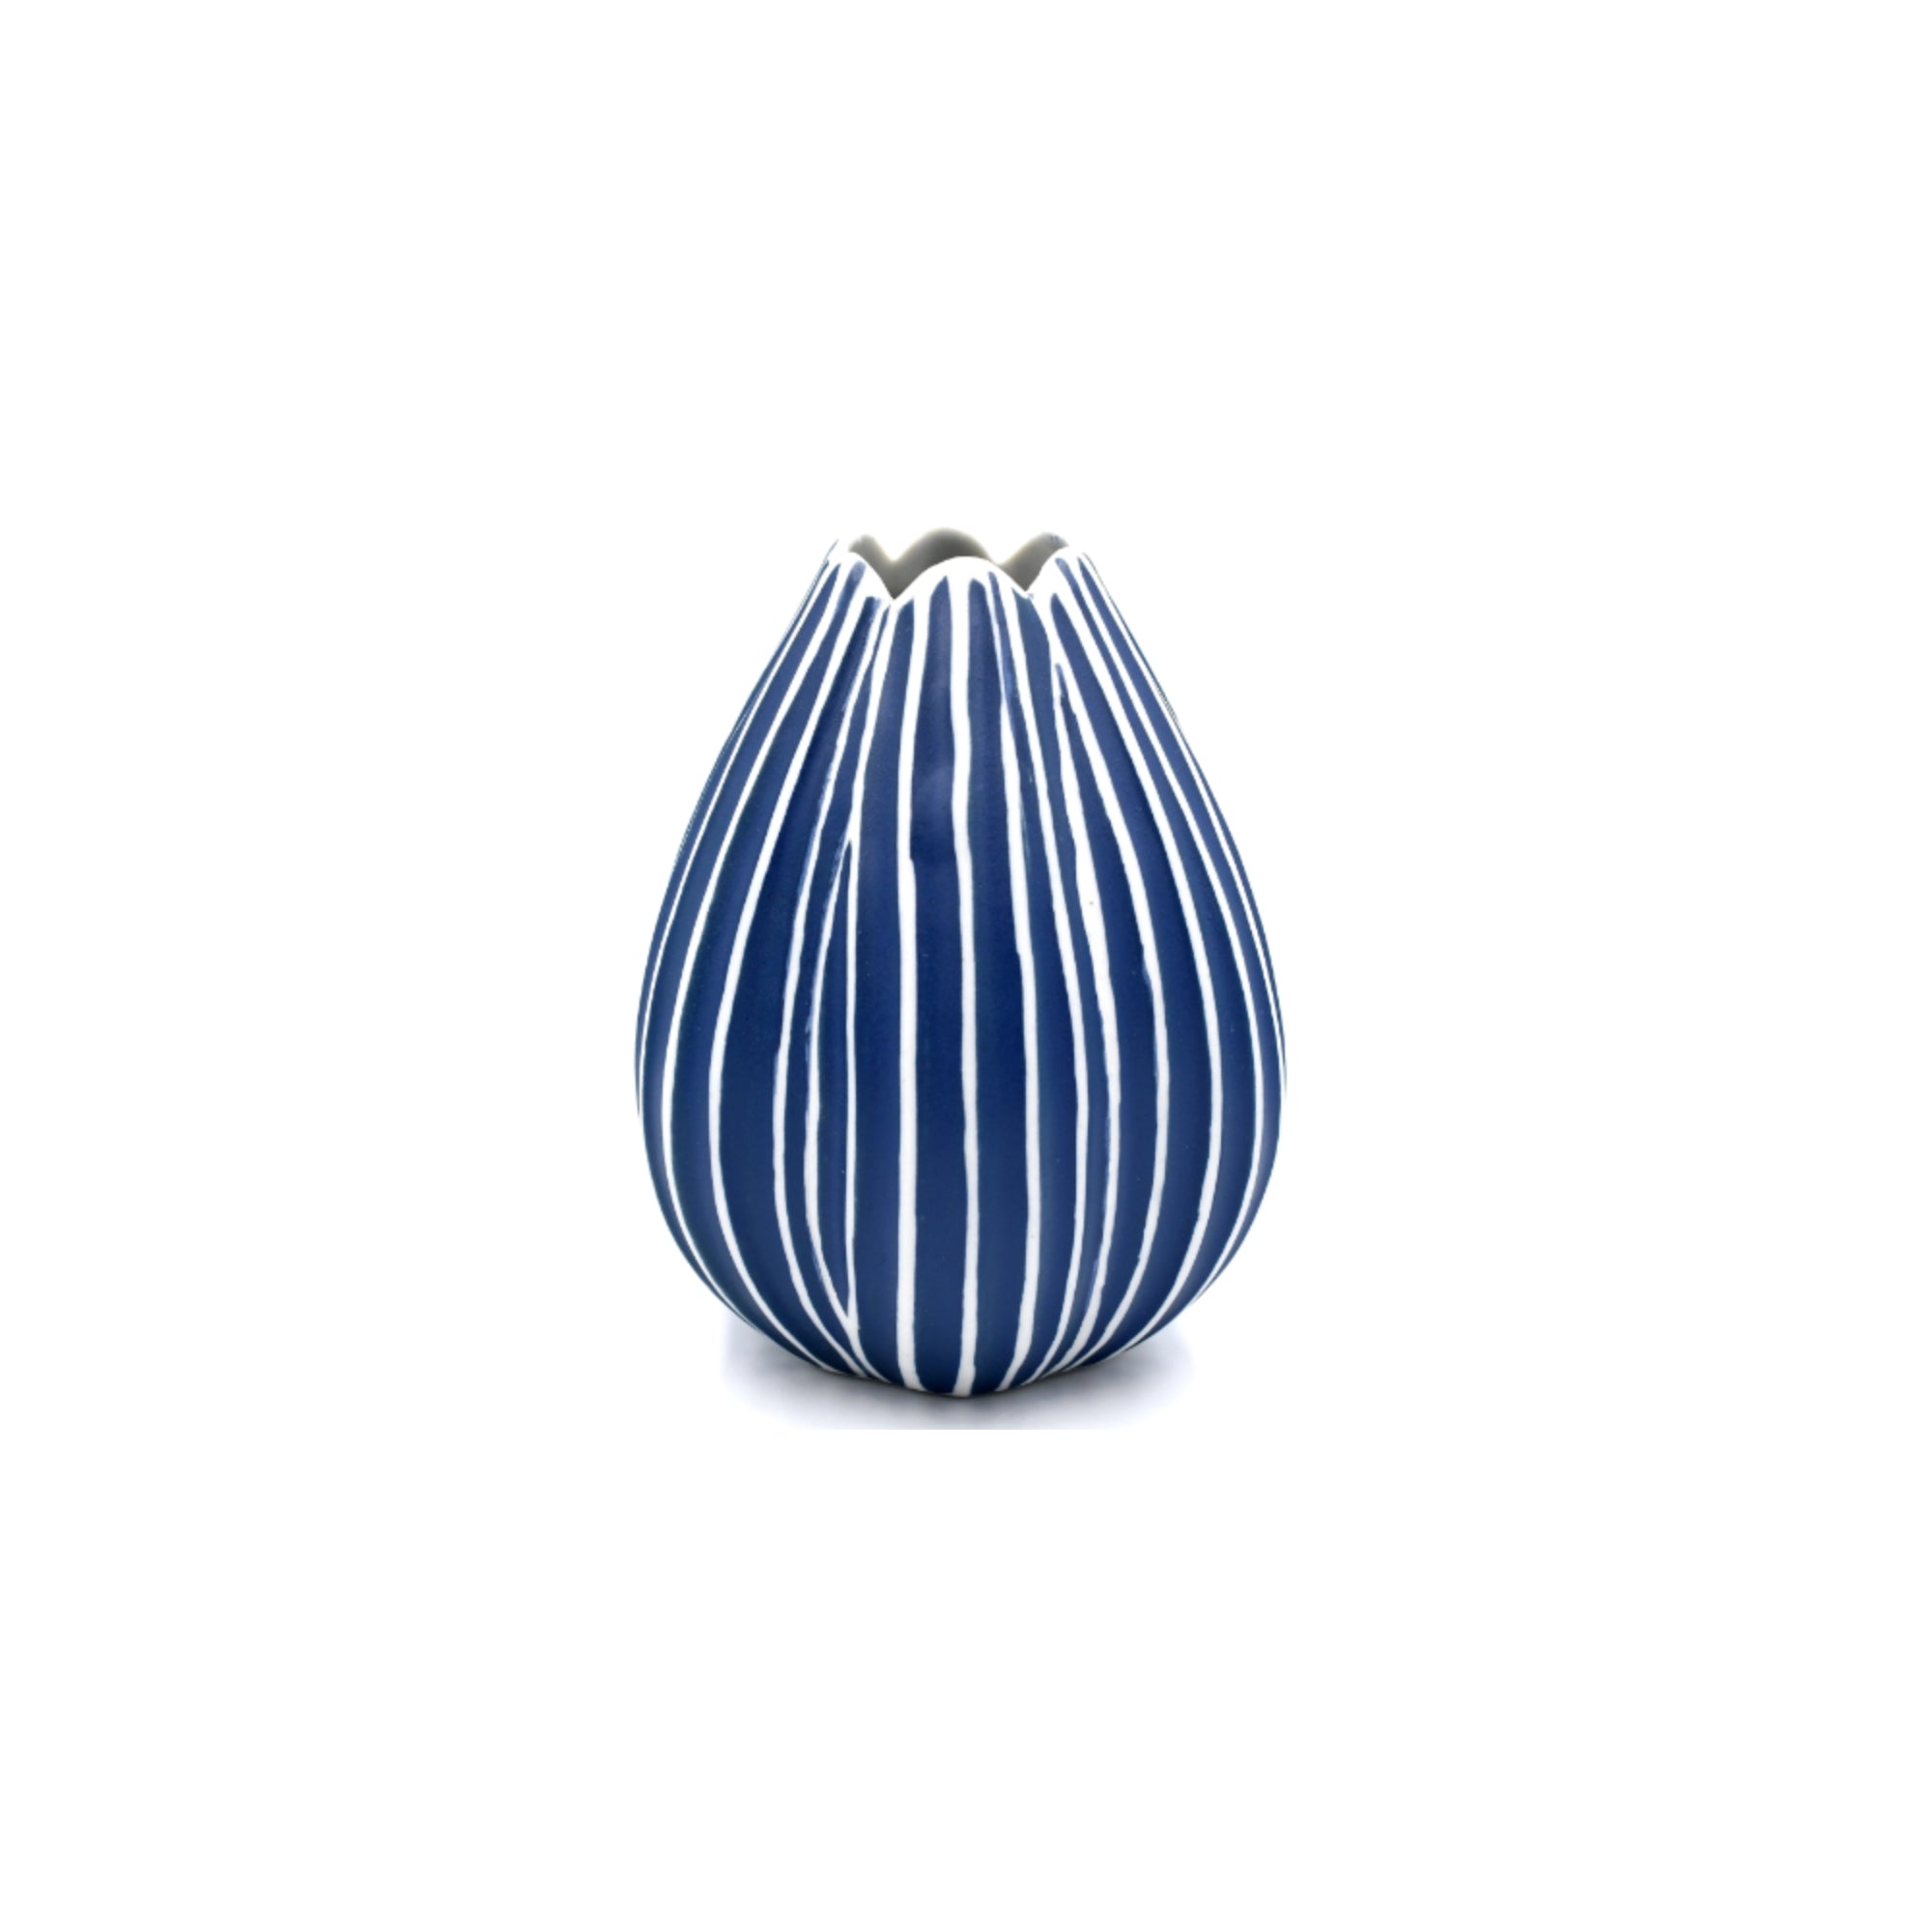 The image displays a vase with a distinctive design featuring vertical blue stripes on a white background. The vase has a rounded shape with a somewhat narrowed opening at the top, creating an elegant profile. 